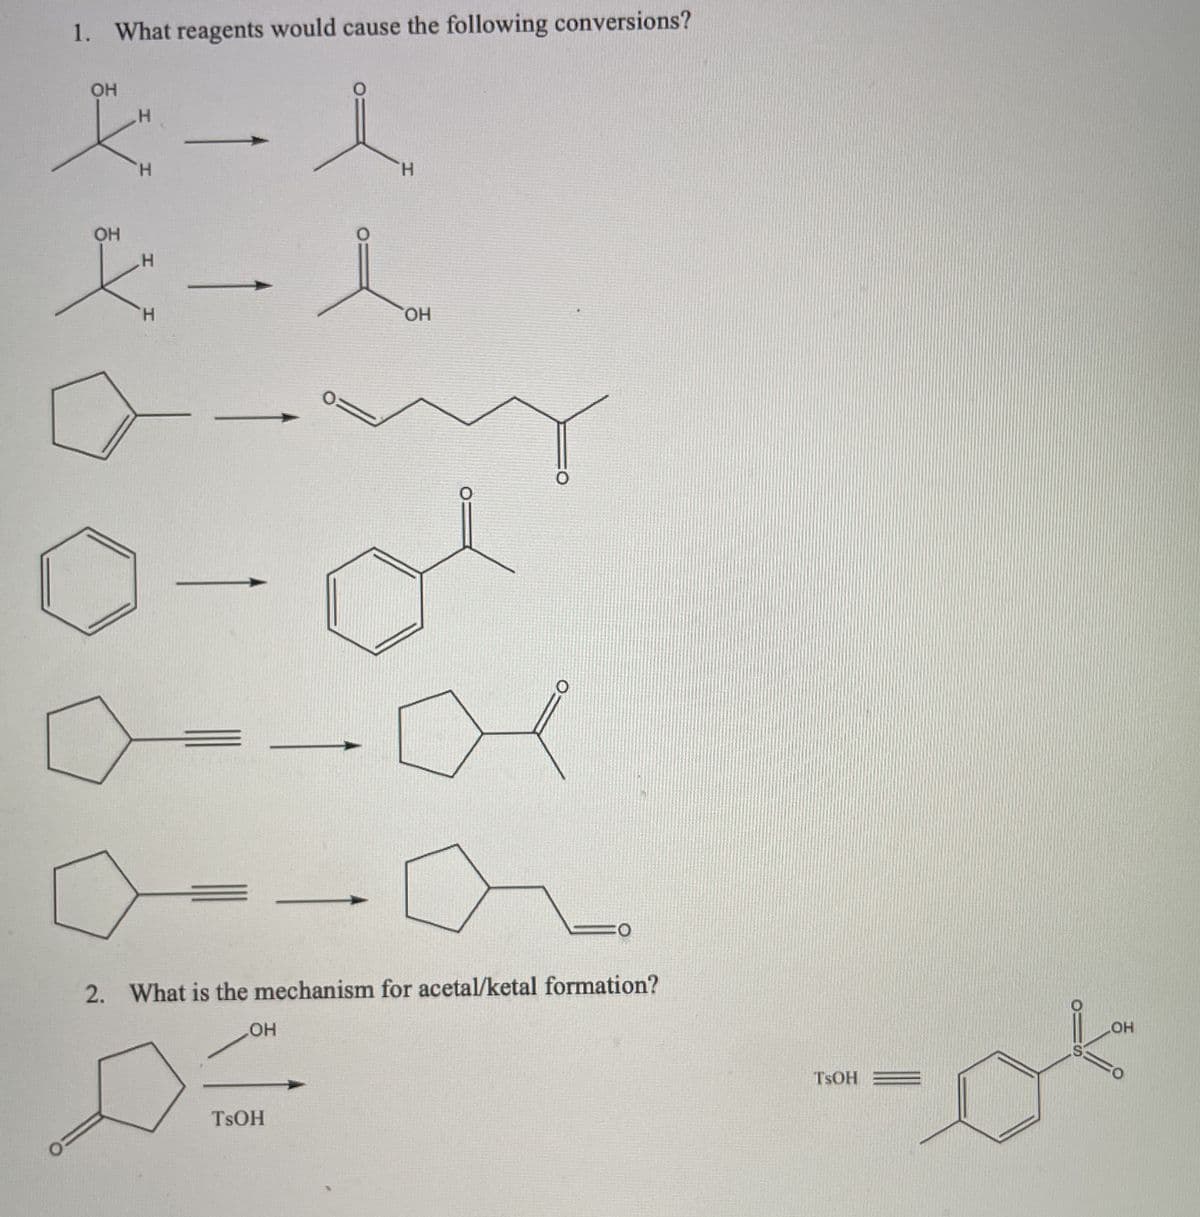 1. What reagents would cause the following conversions?
OH
H.
H.
OH
H.
HO,
2.
What is the mechanism for acetal/ketal formation?
OH
HO
TSOH
TSOH
